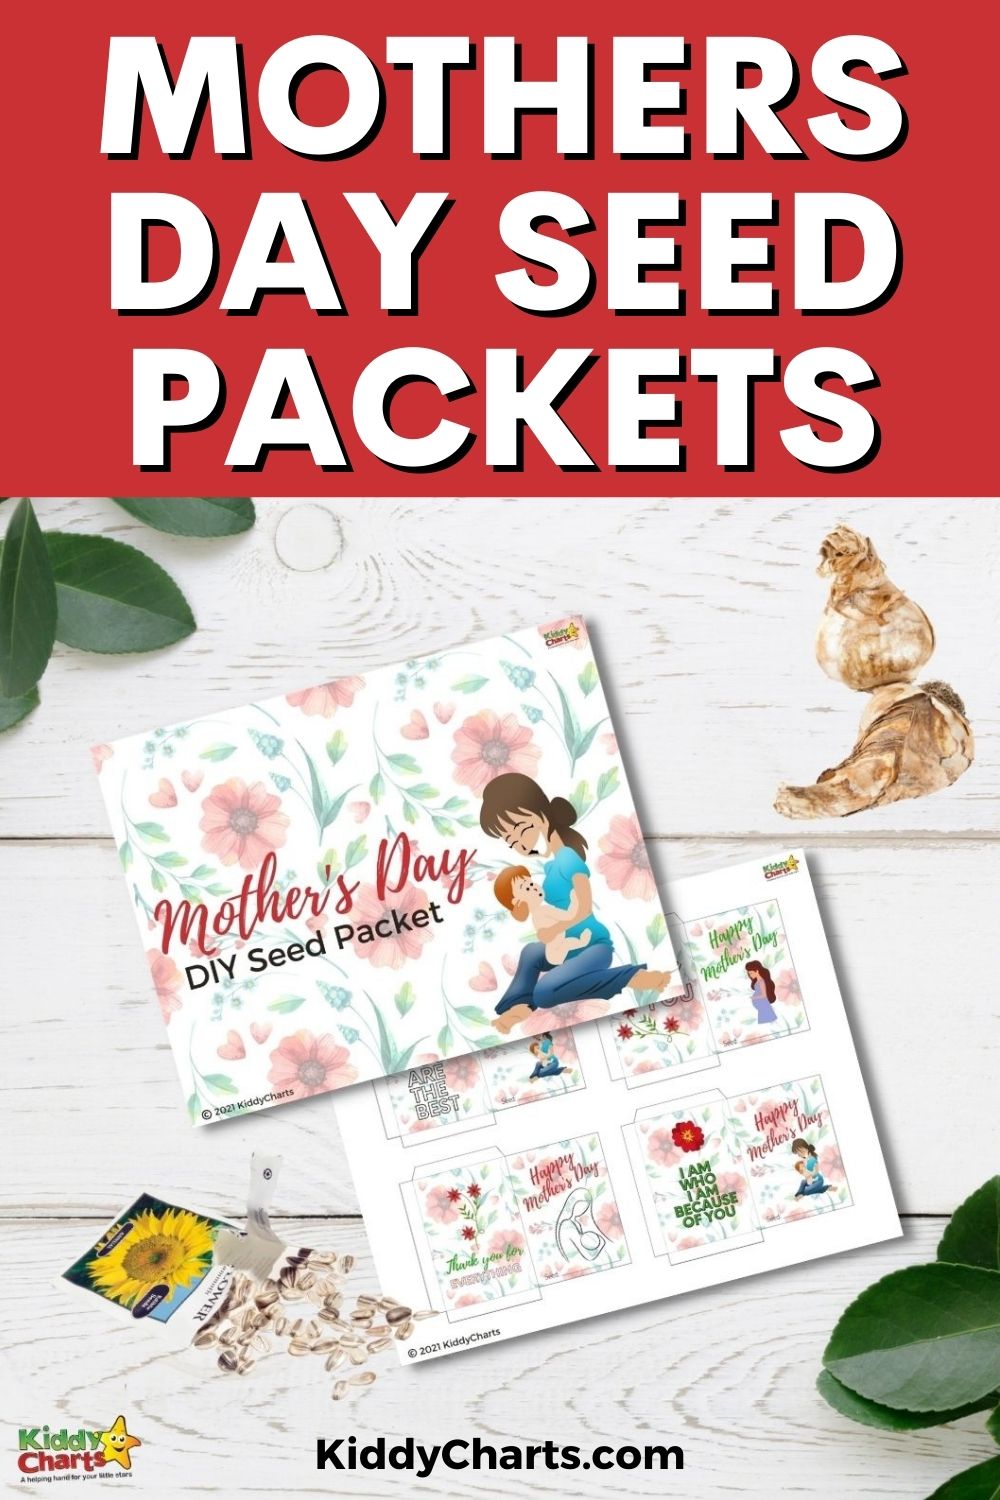 mother-s-day-seed-packets-mom-s-gifts-kiddycharts